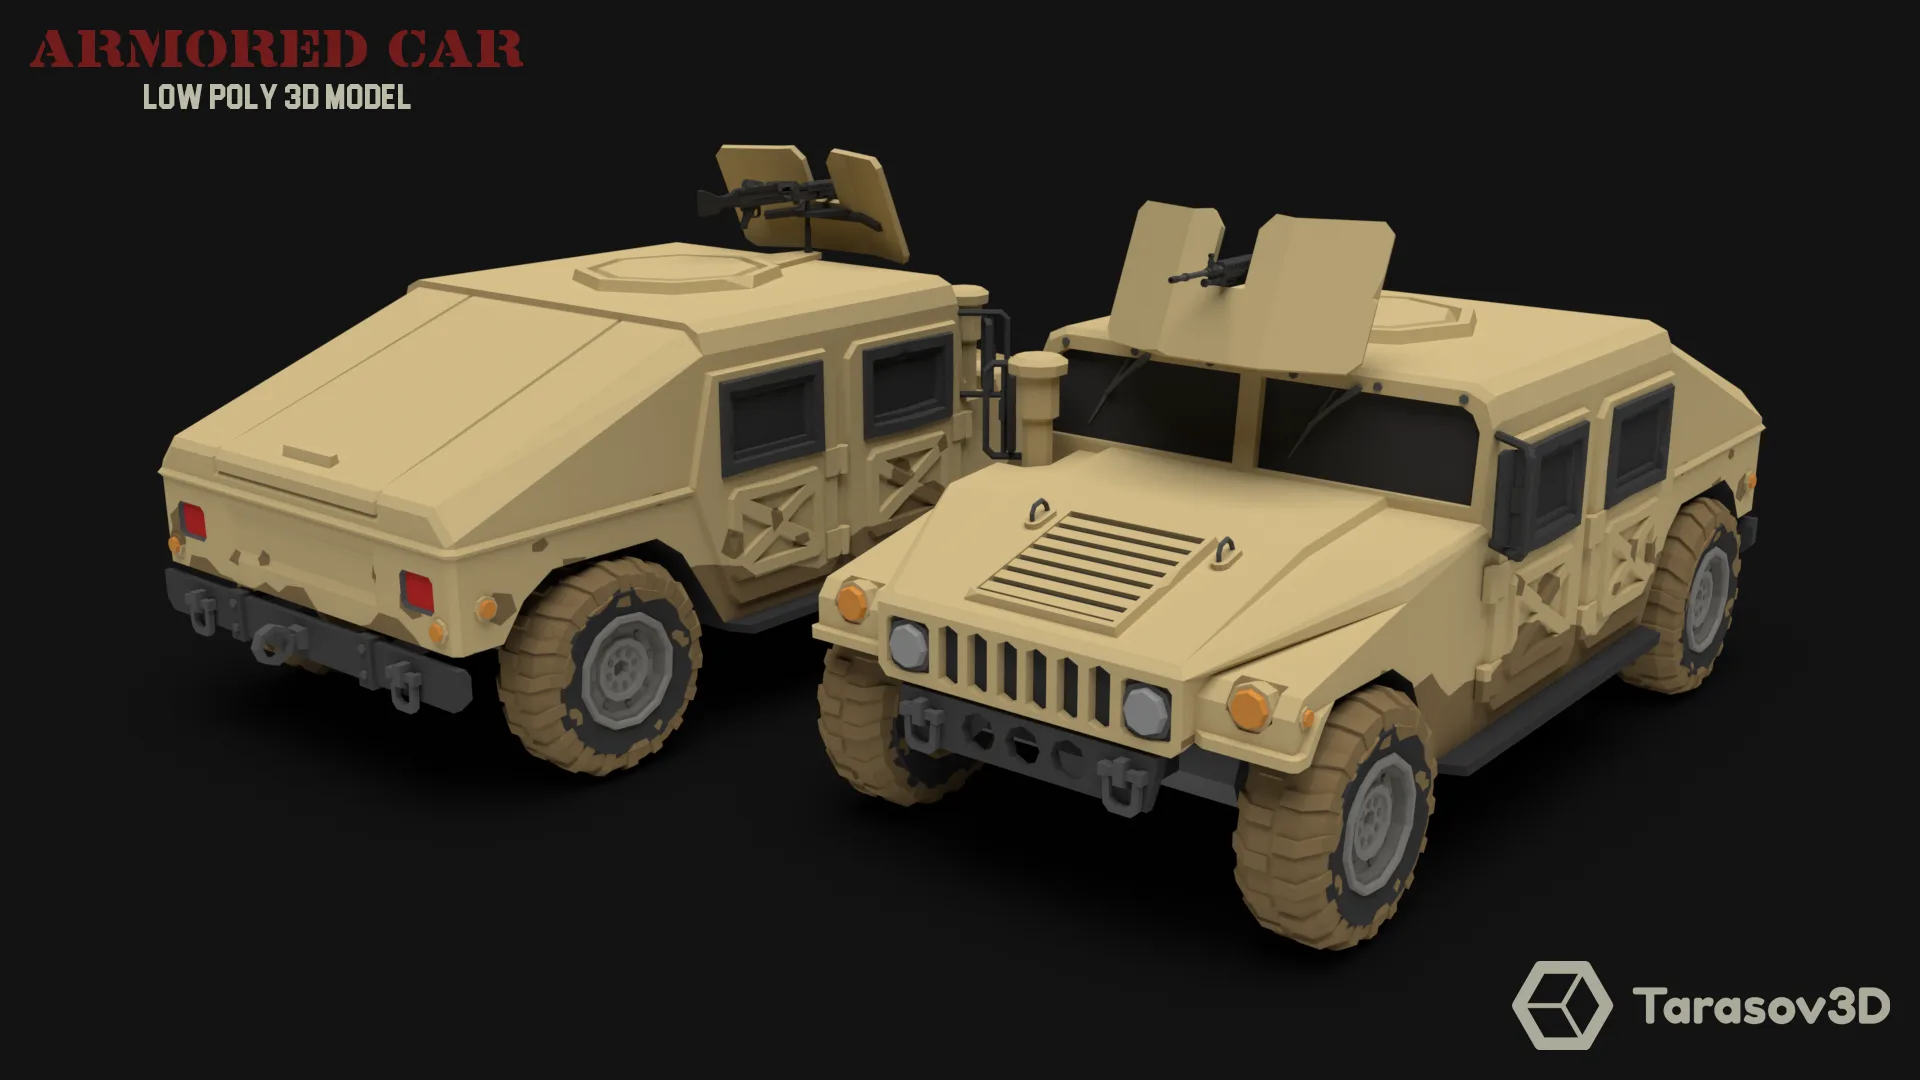 Armored Car LowPoly 3D model